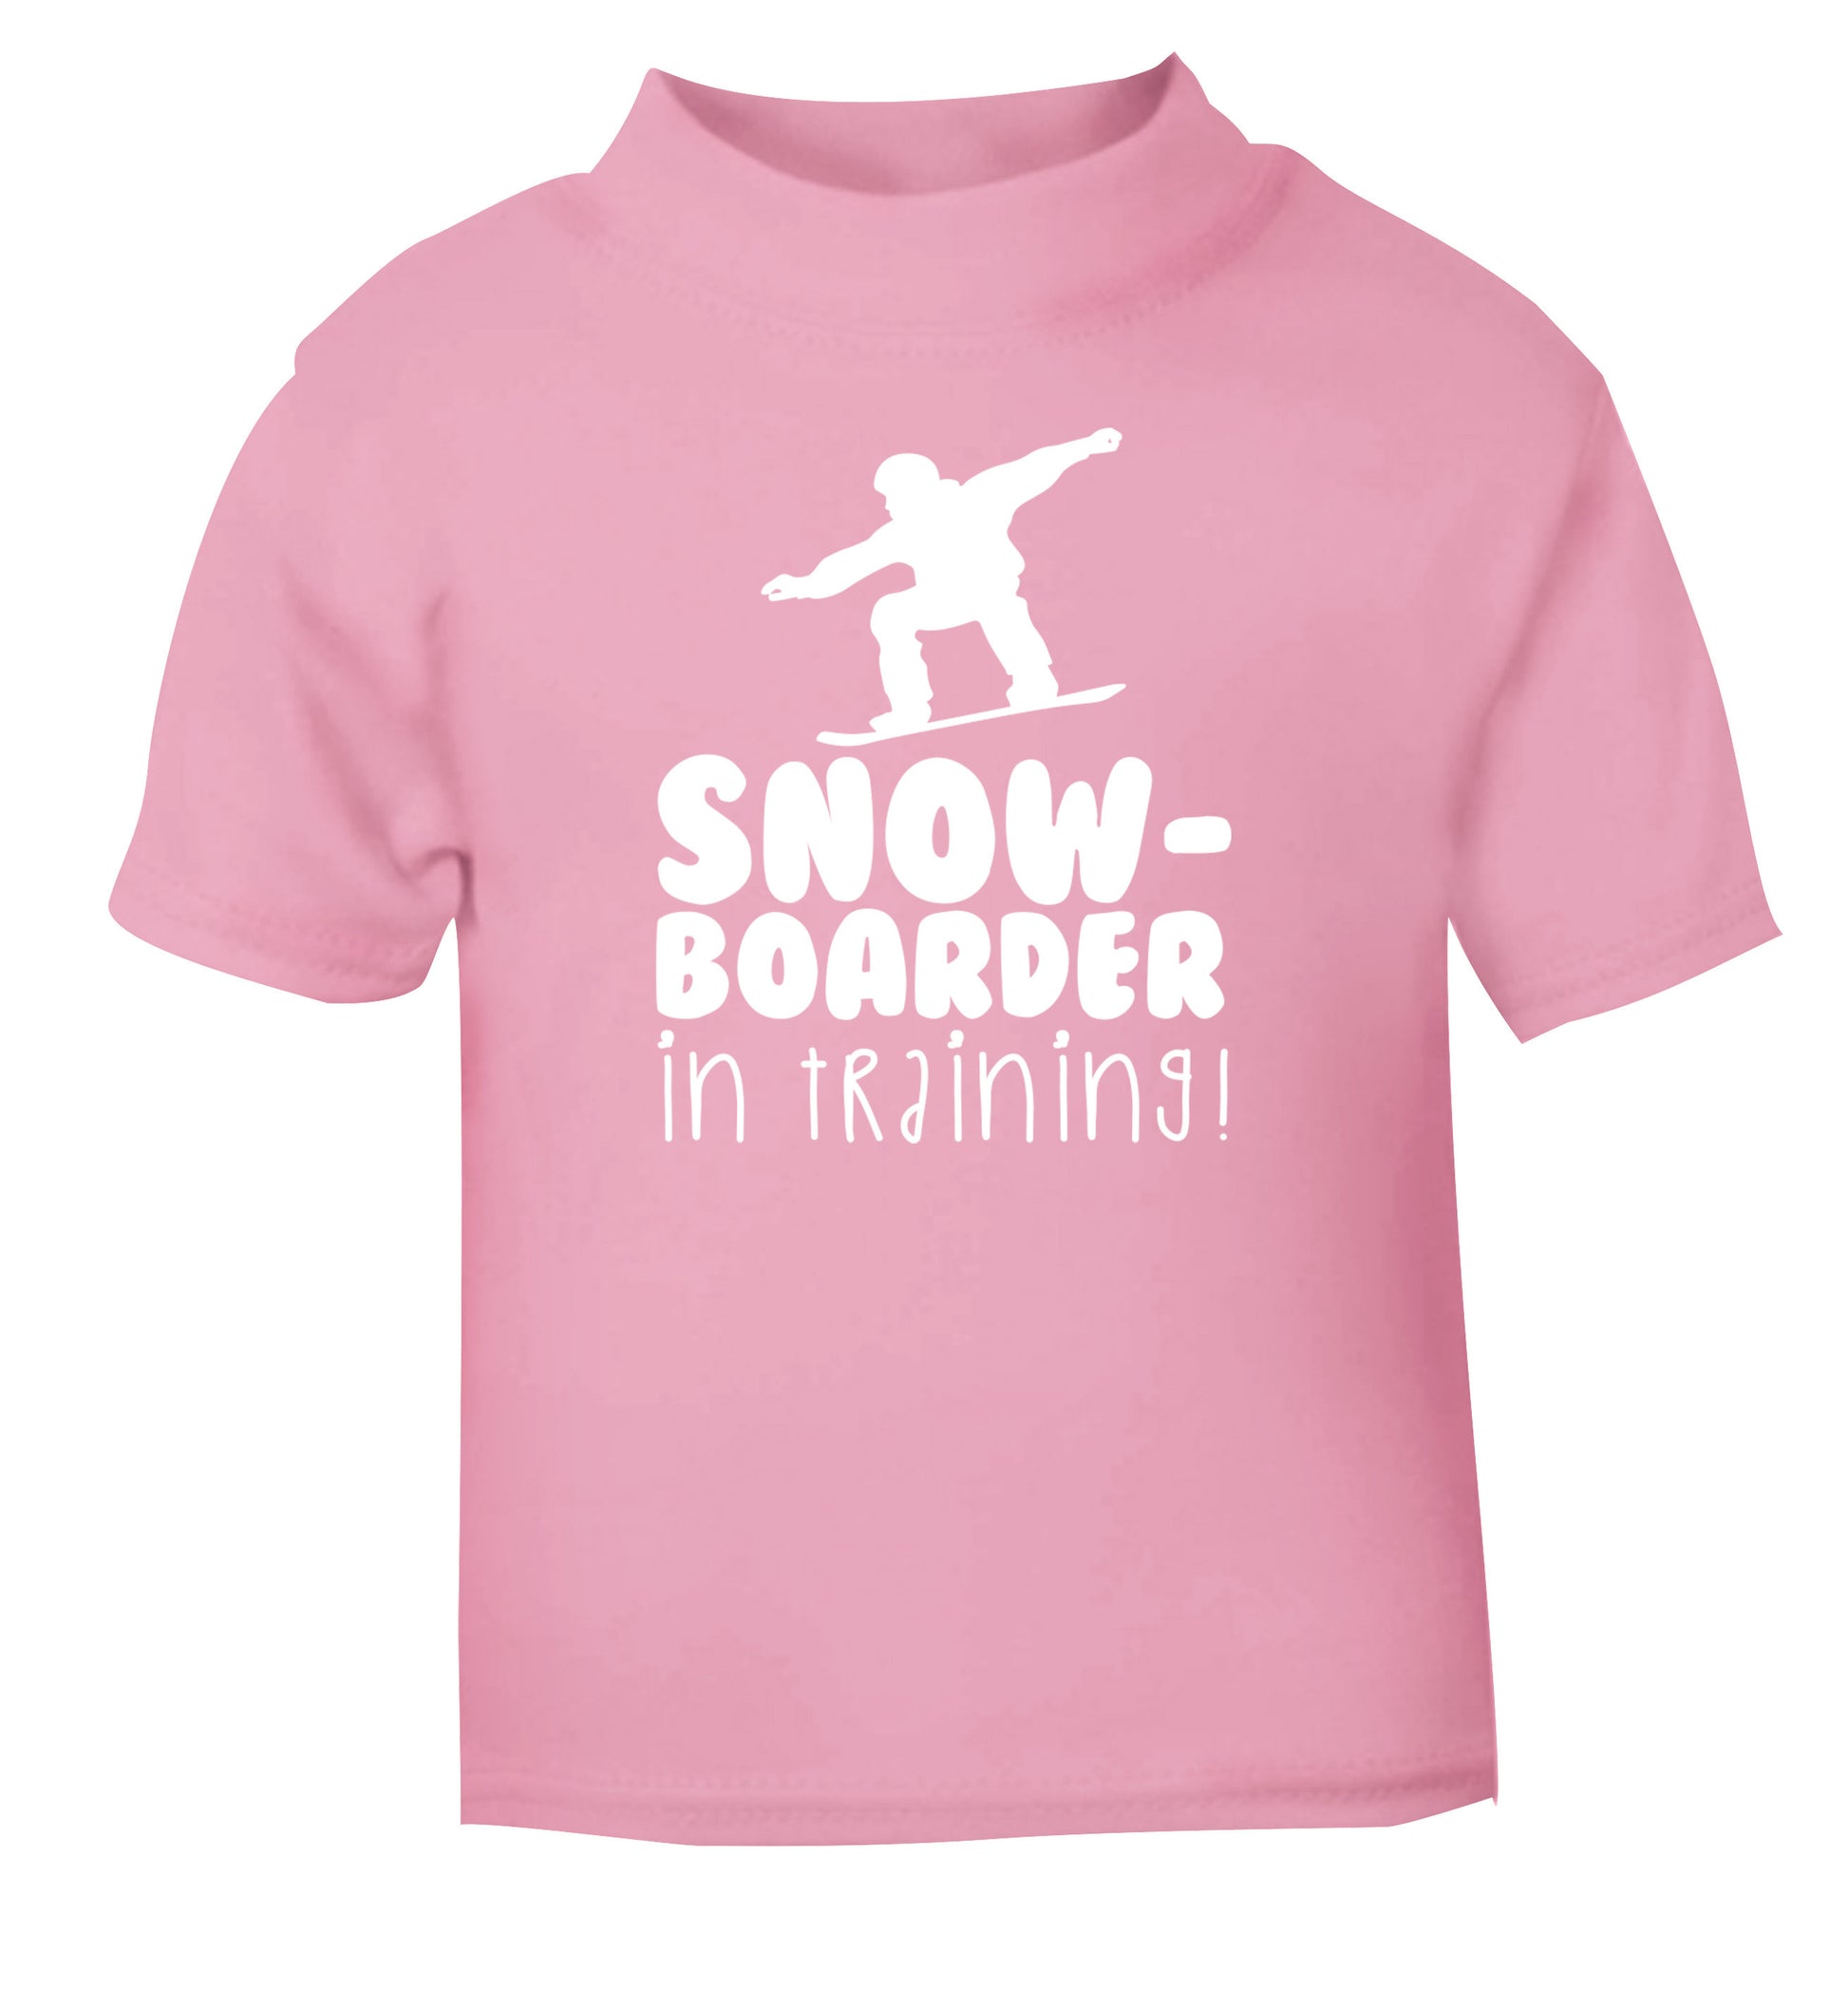 Snowboarder in training light pink Baby Toddler Tshirt 2 Years